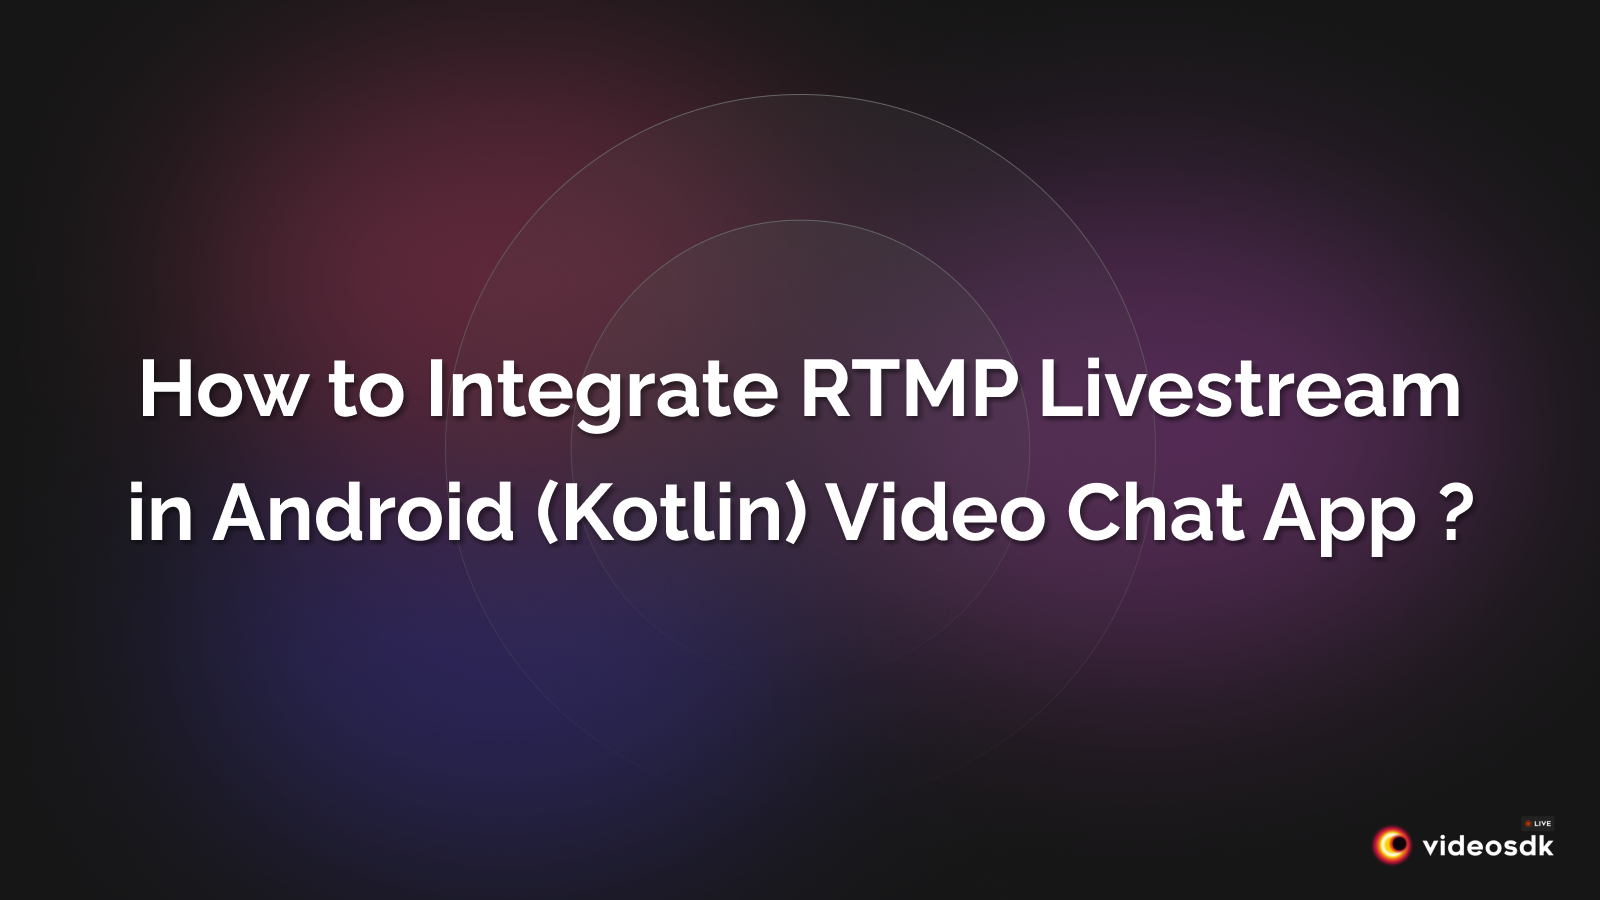 How to Integrate RTMP Livestream Feature in Android(Kotlin) Video Chat App?